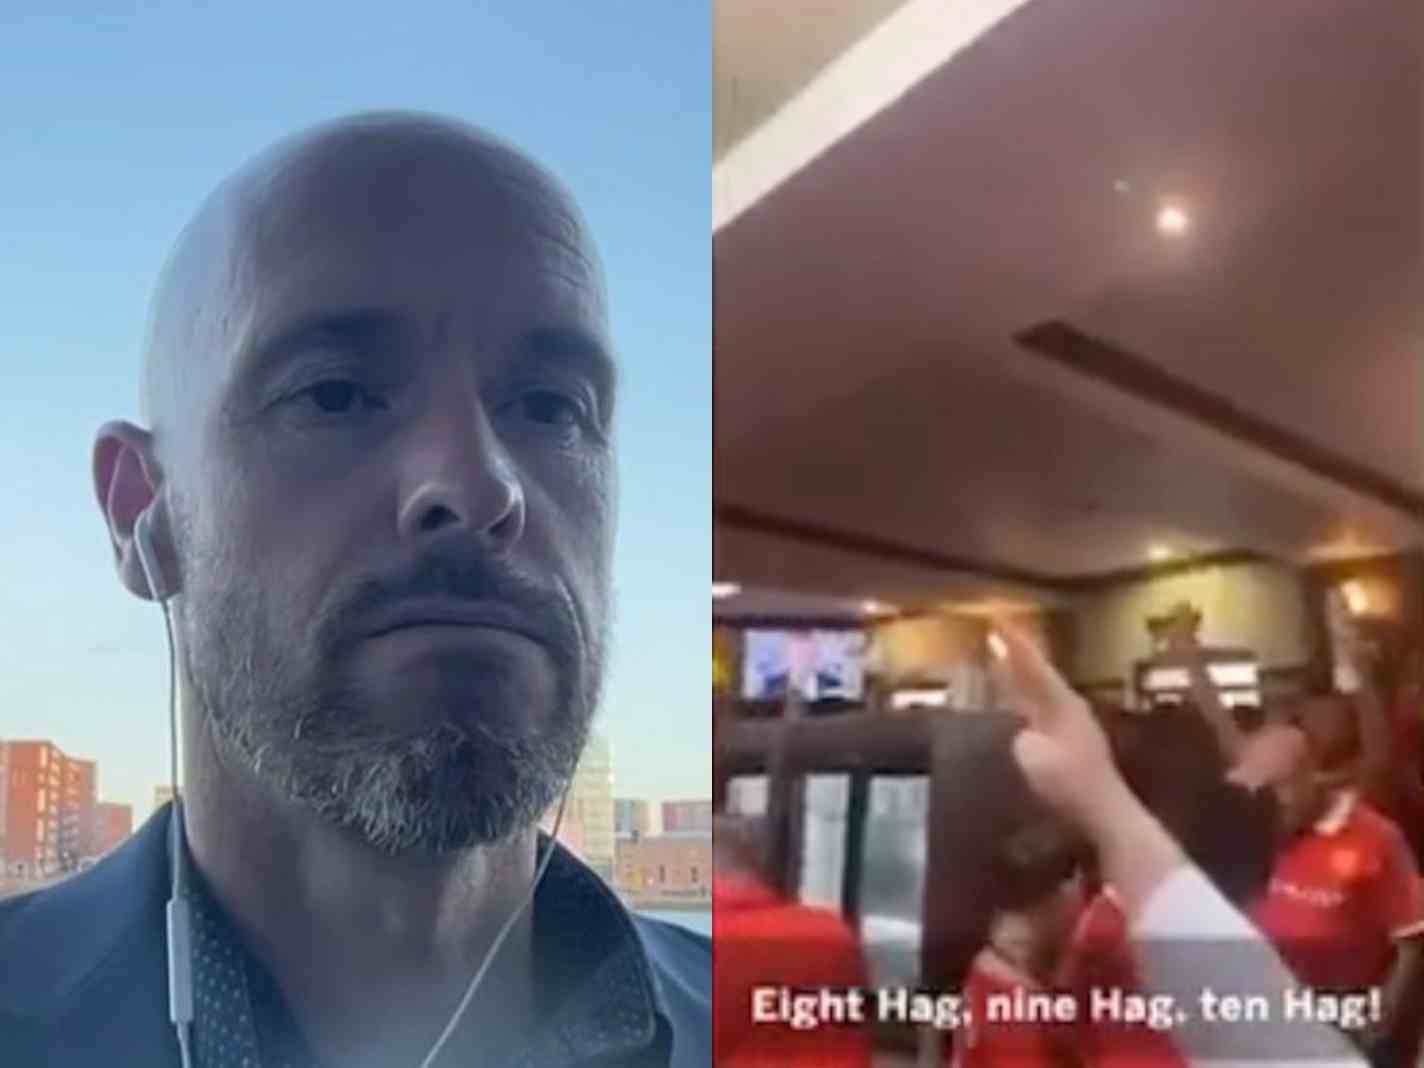 In this image - Erik ten Hag listening to his new chant from Man United fans